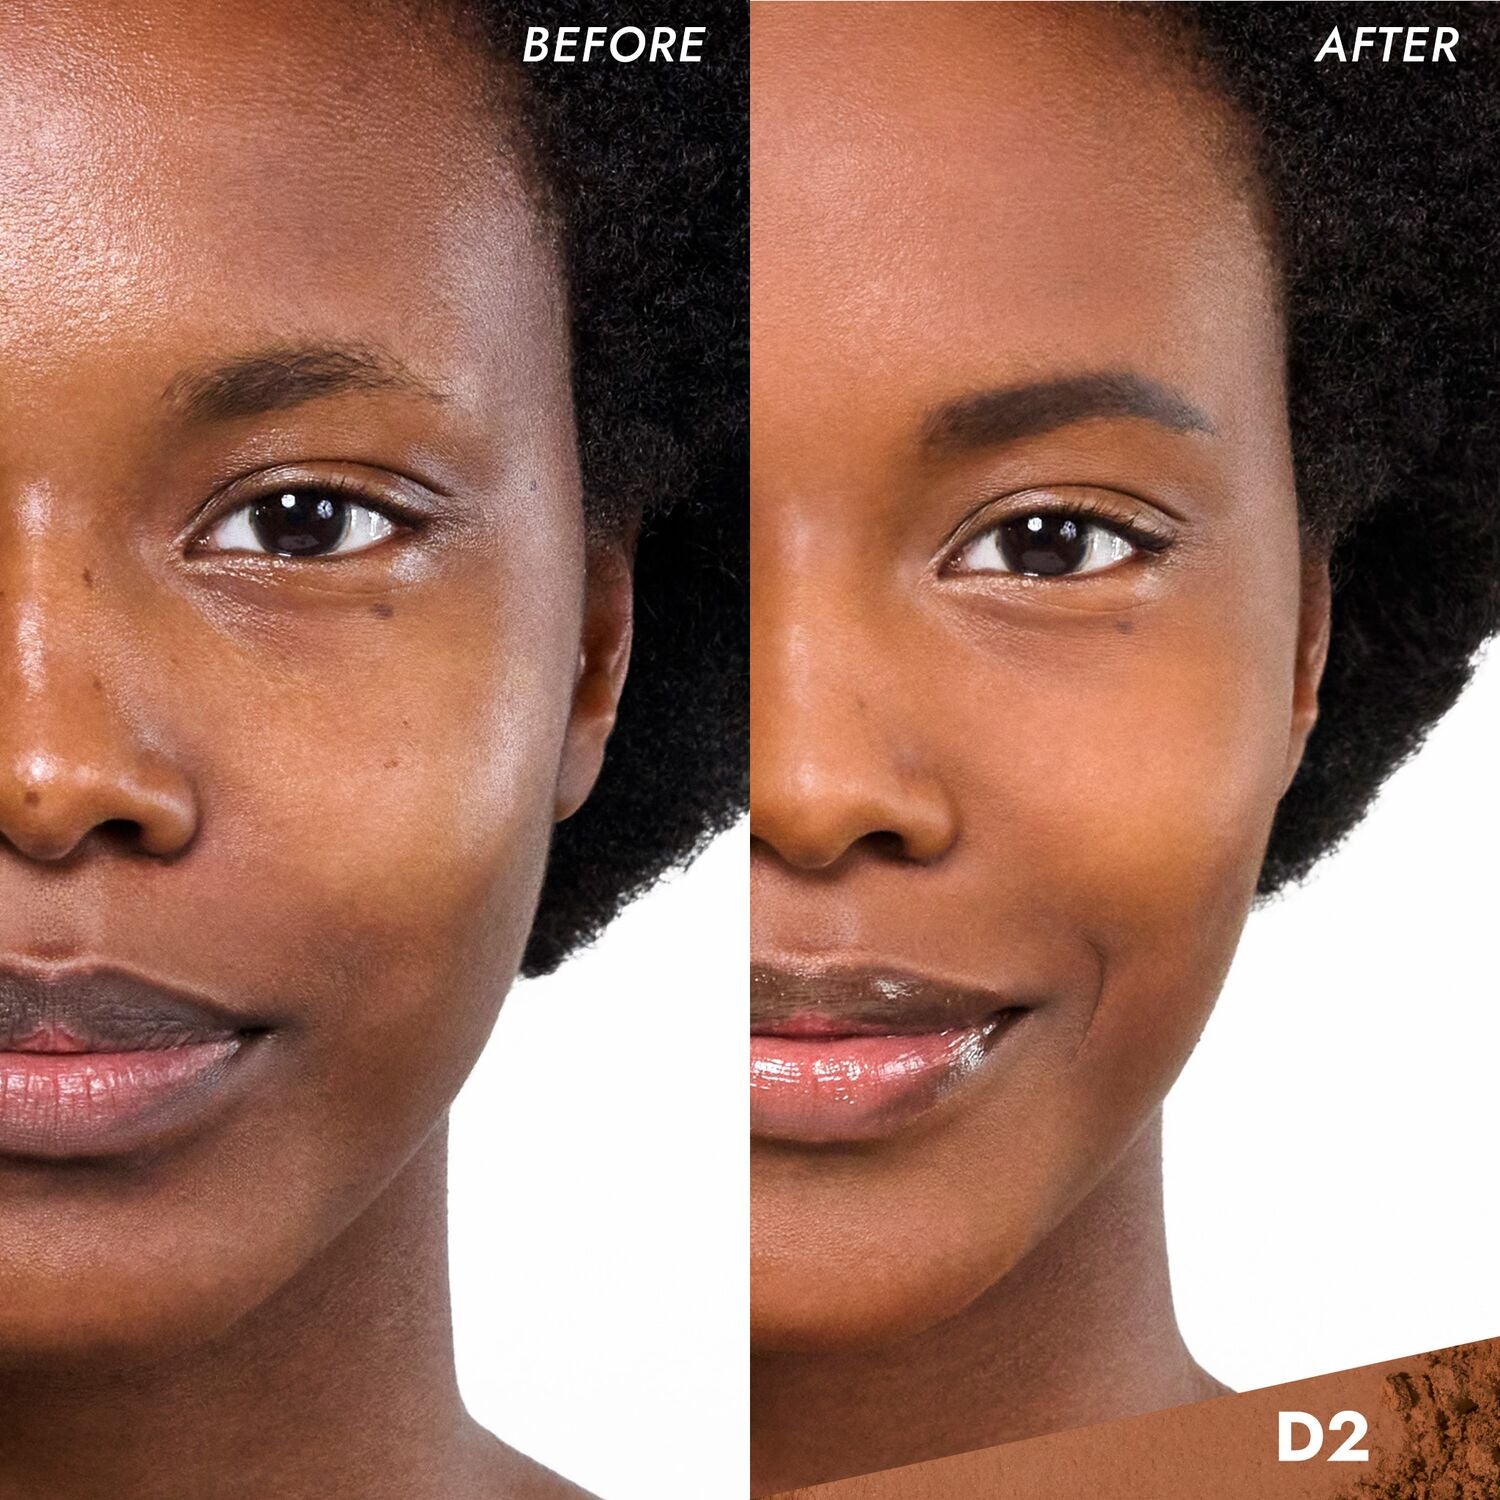 Coverfx Pressed Mineral Foundation model before and after image in shade  D2